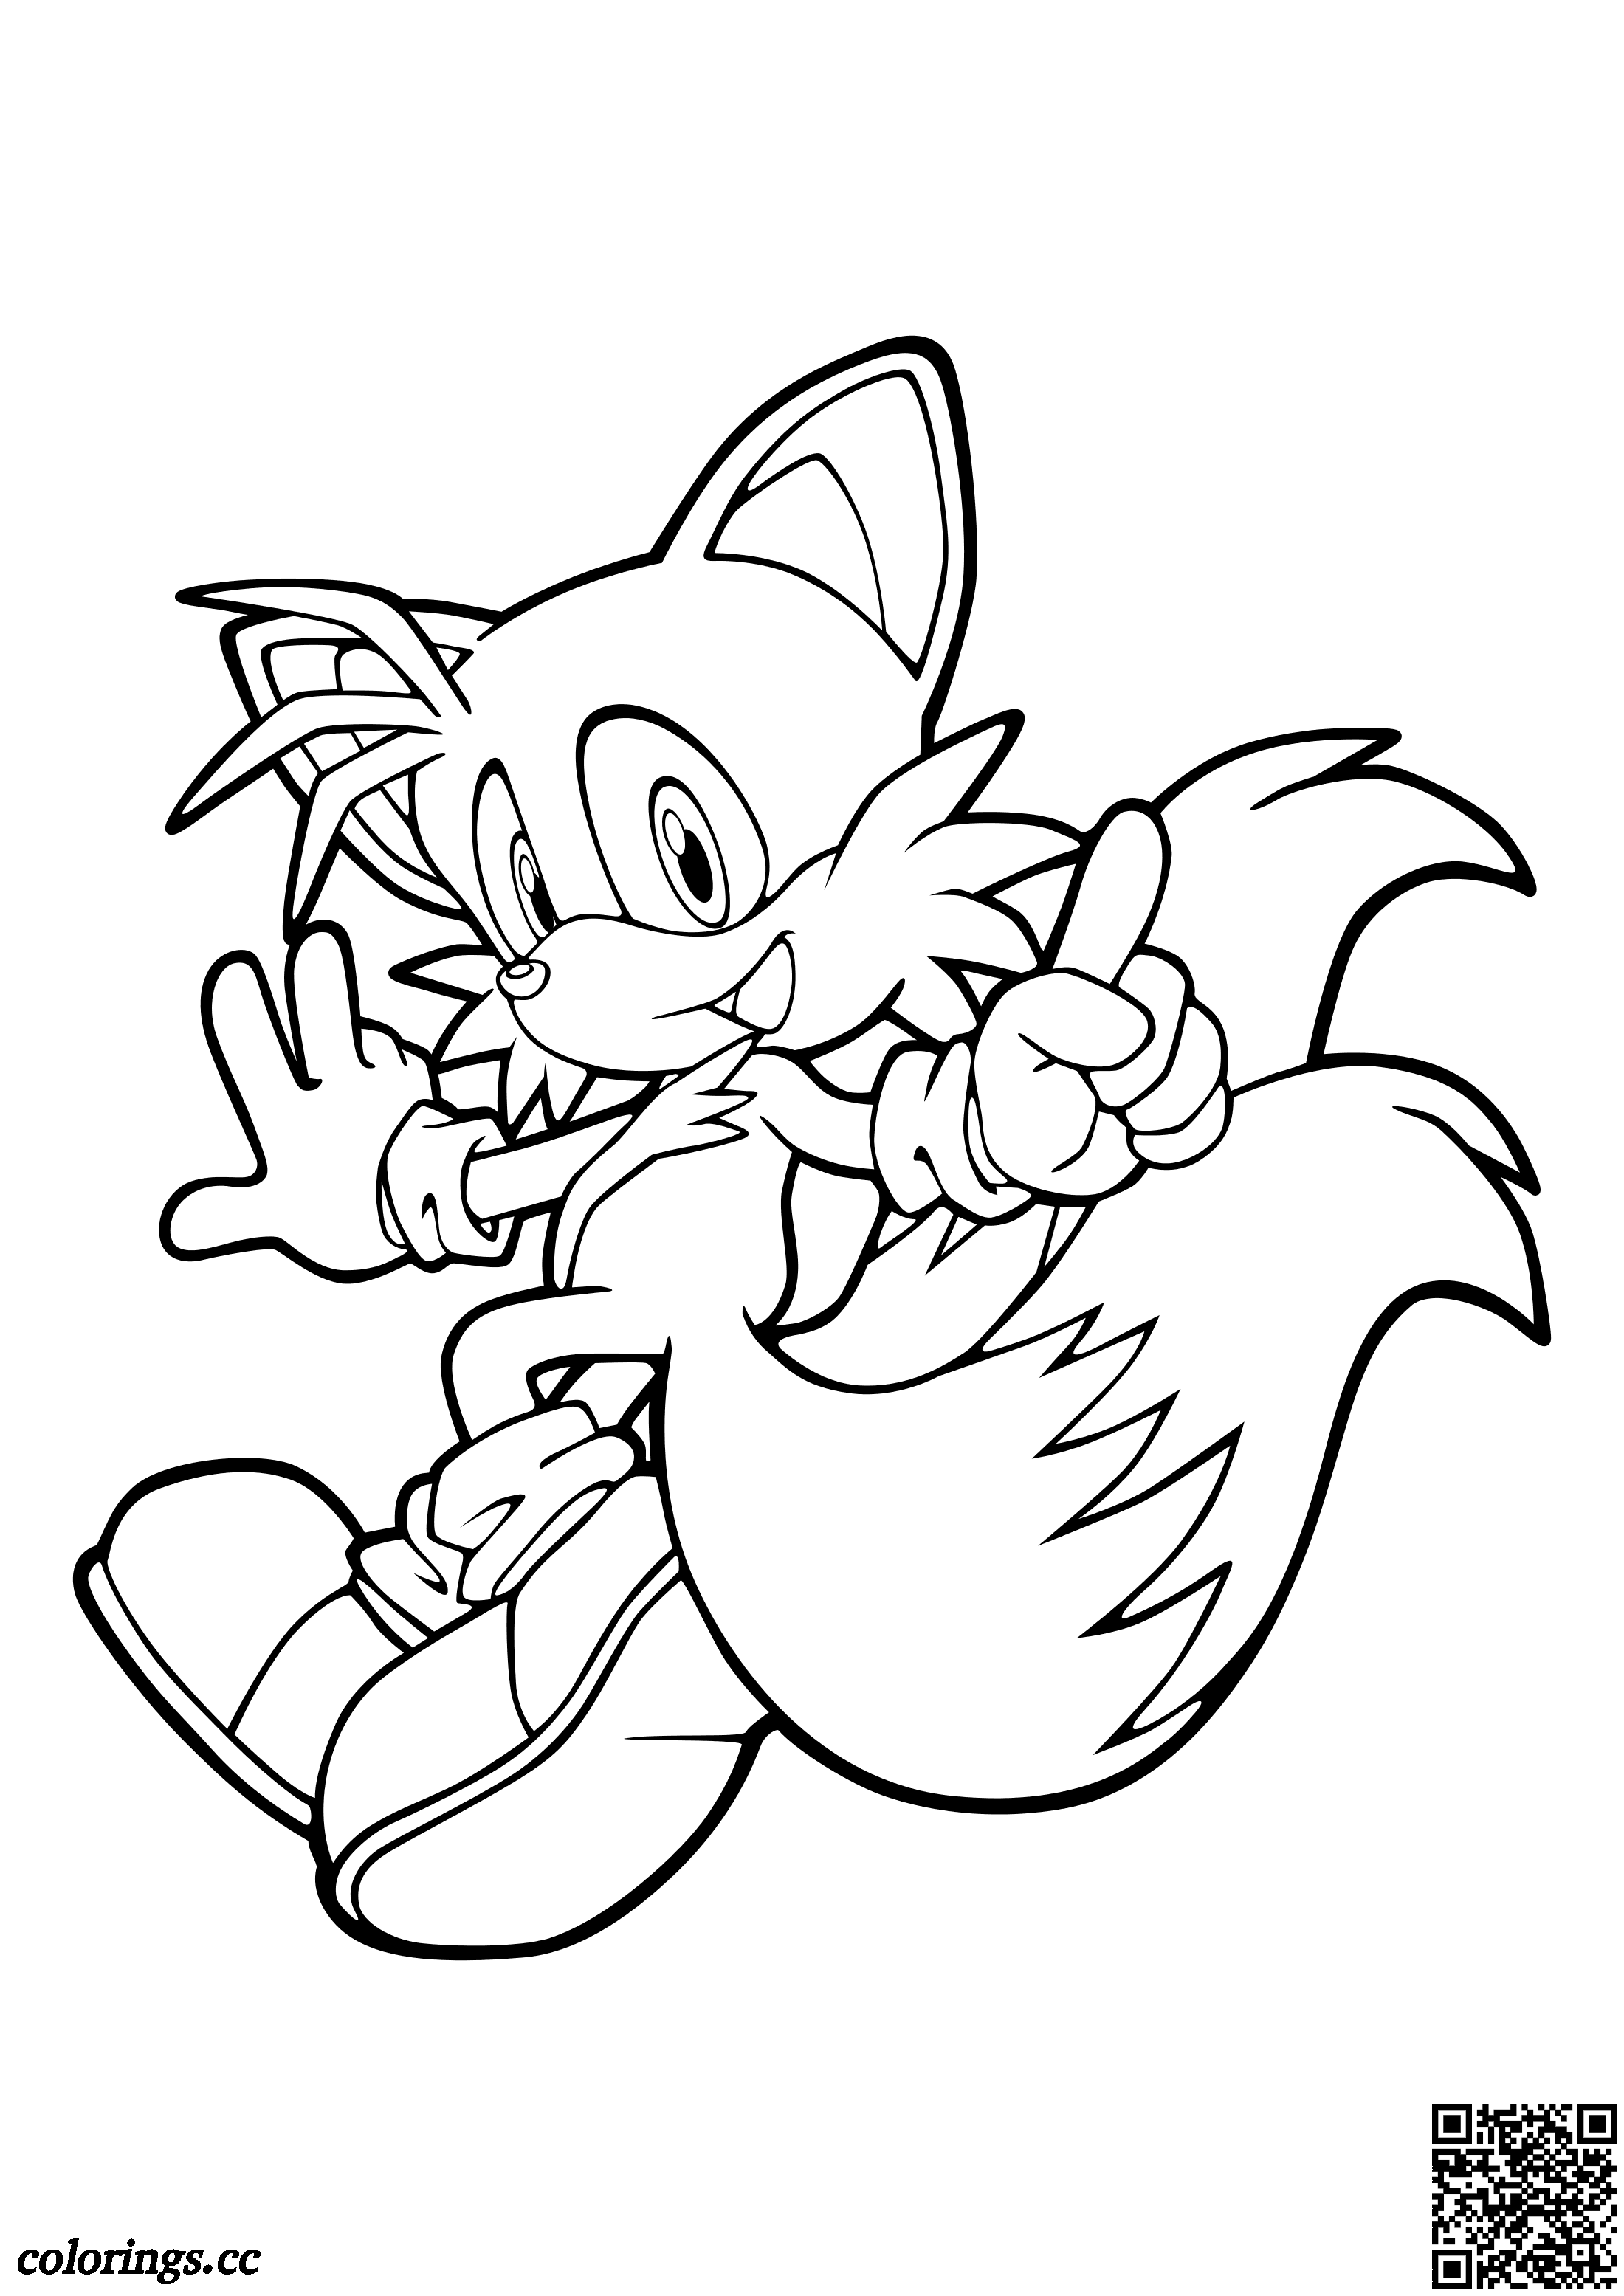 Tails is running coloring pages, Sonic the Hedgehog coloring pages